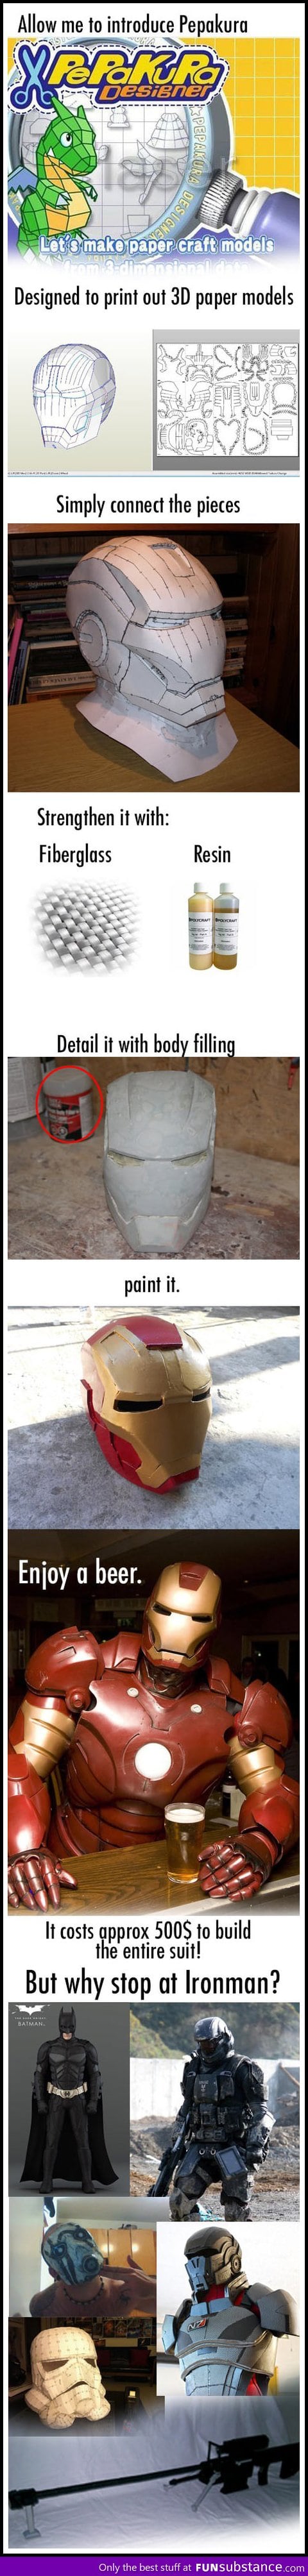 Make your own Iron Man suit